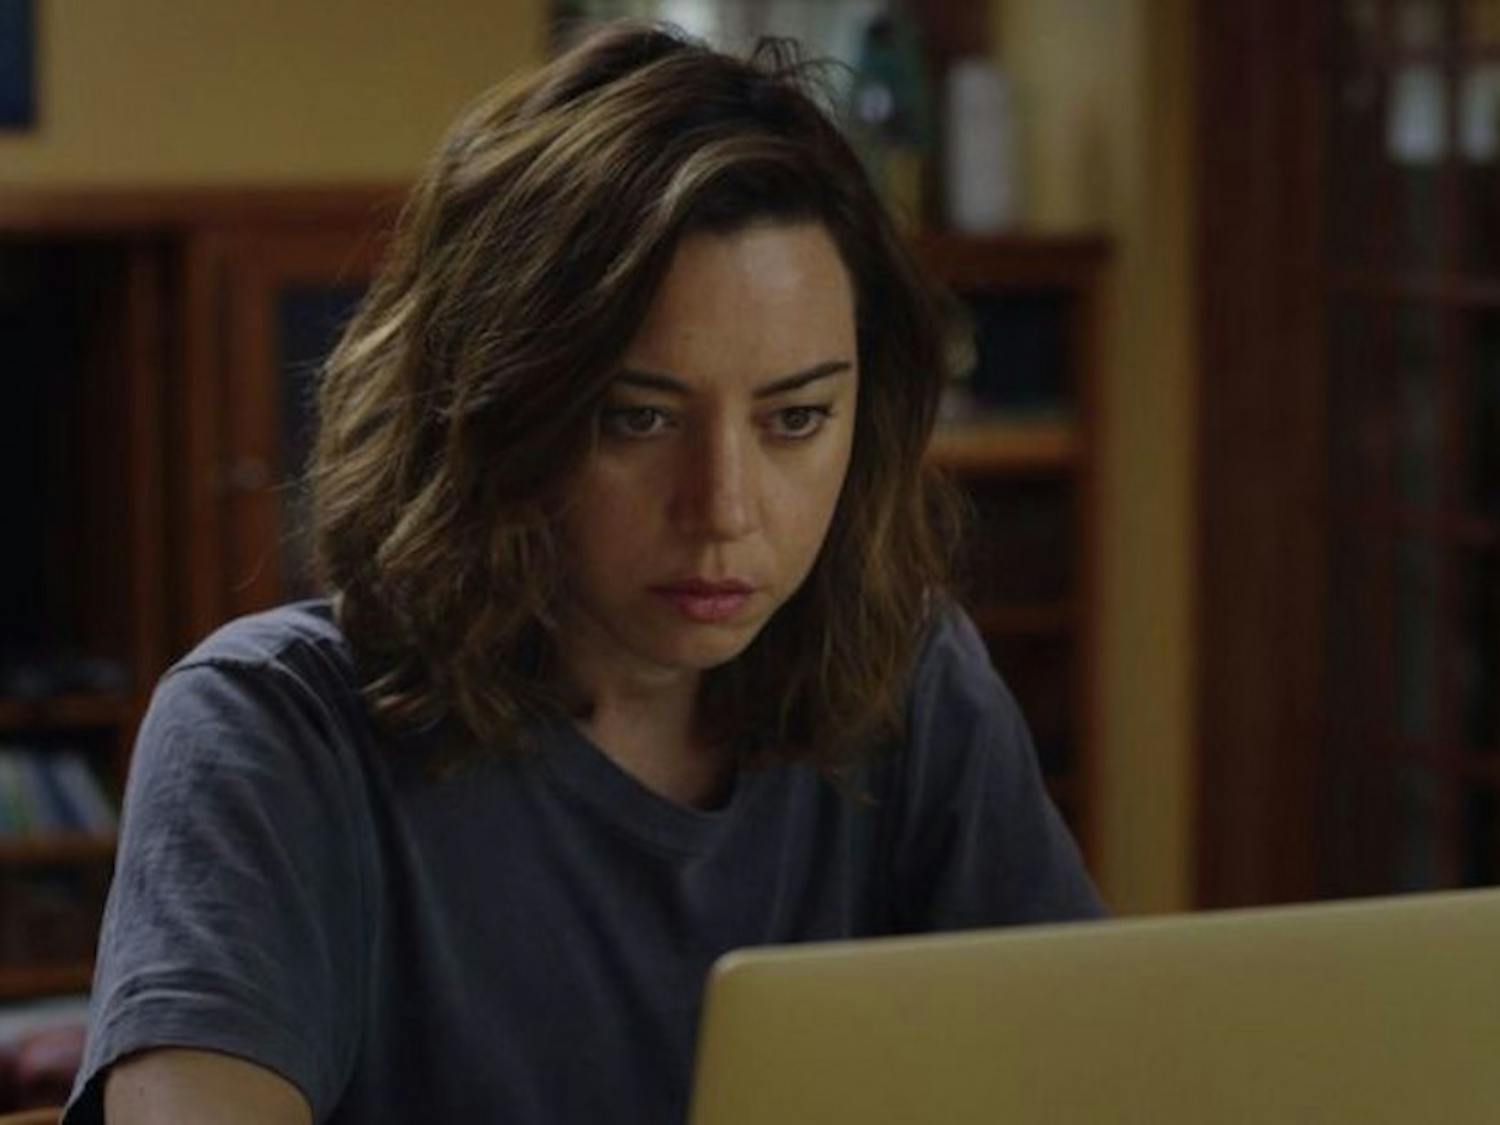 Aubrey Plaza stars in the second season of "Easy," which was released Dec. 1 on the streaming service Netflix.